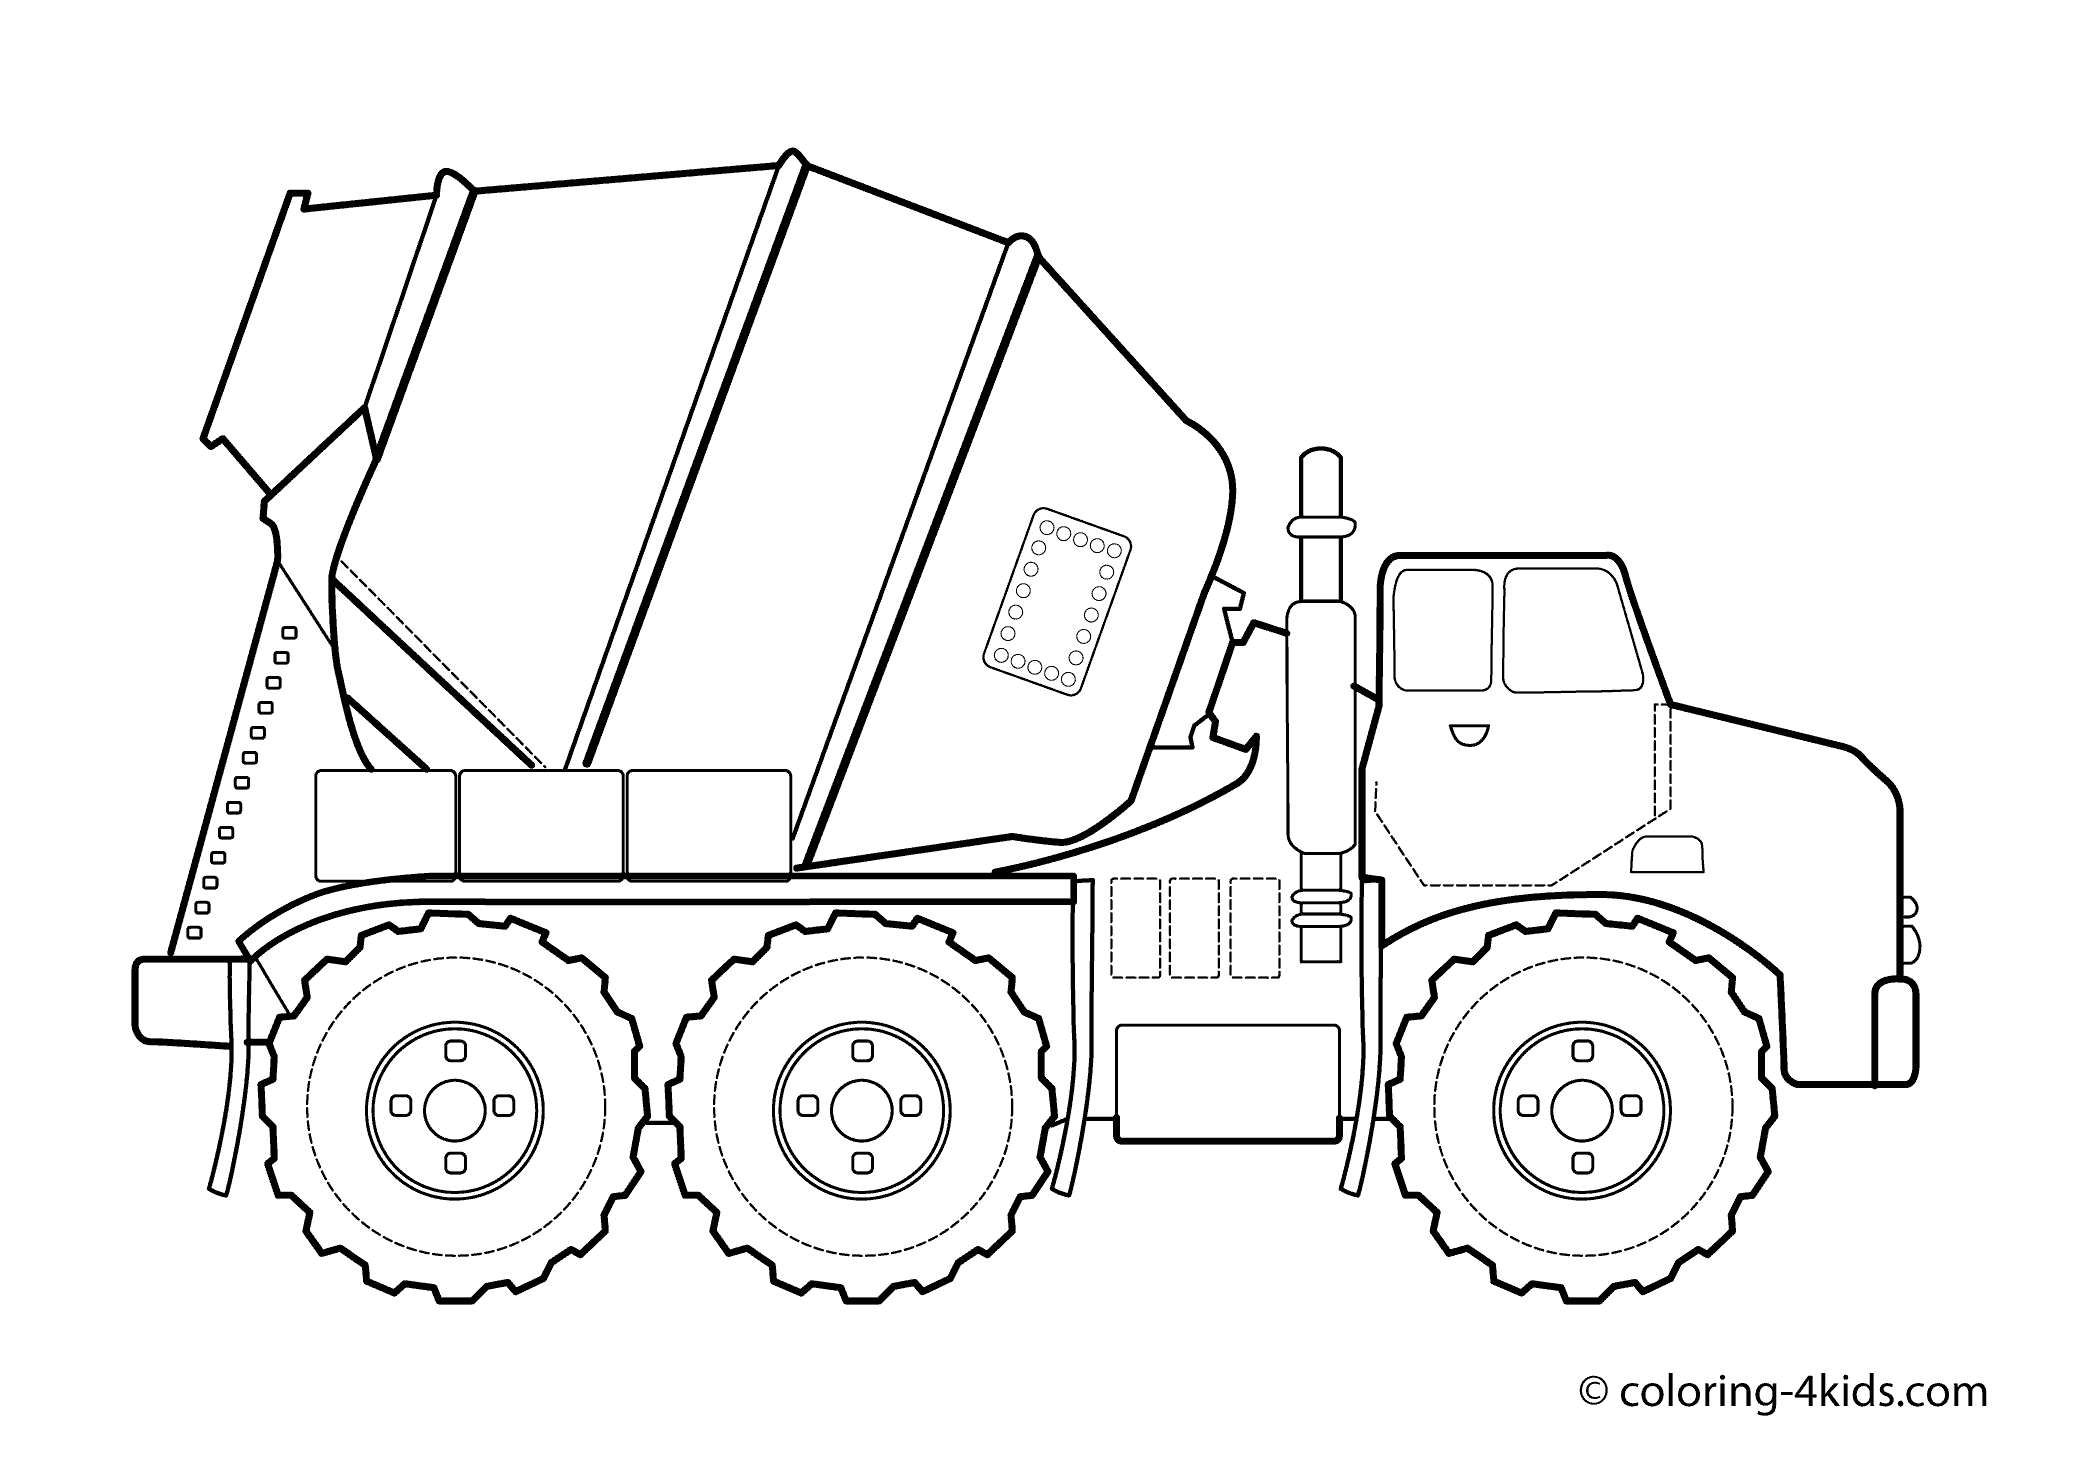 Free Printable Coloring Pages Construction Vehicles